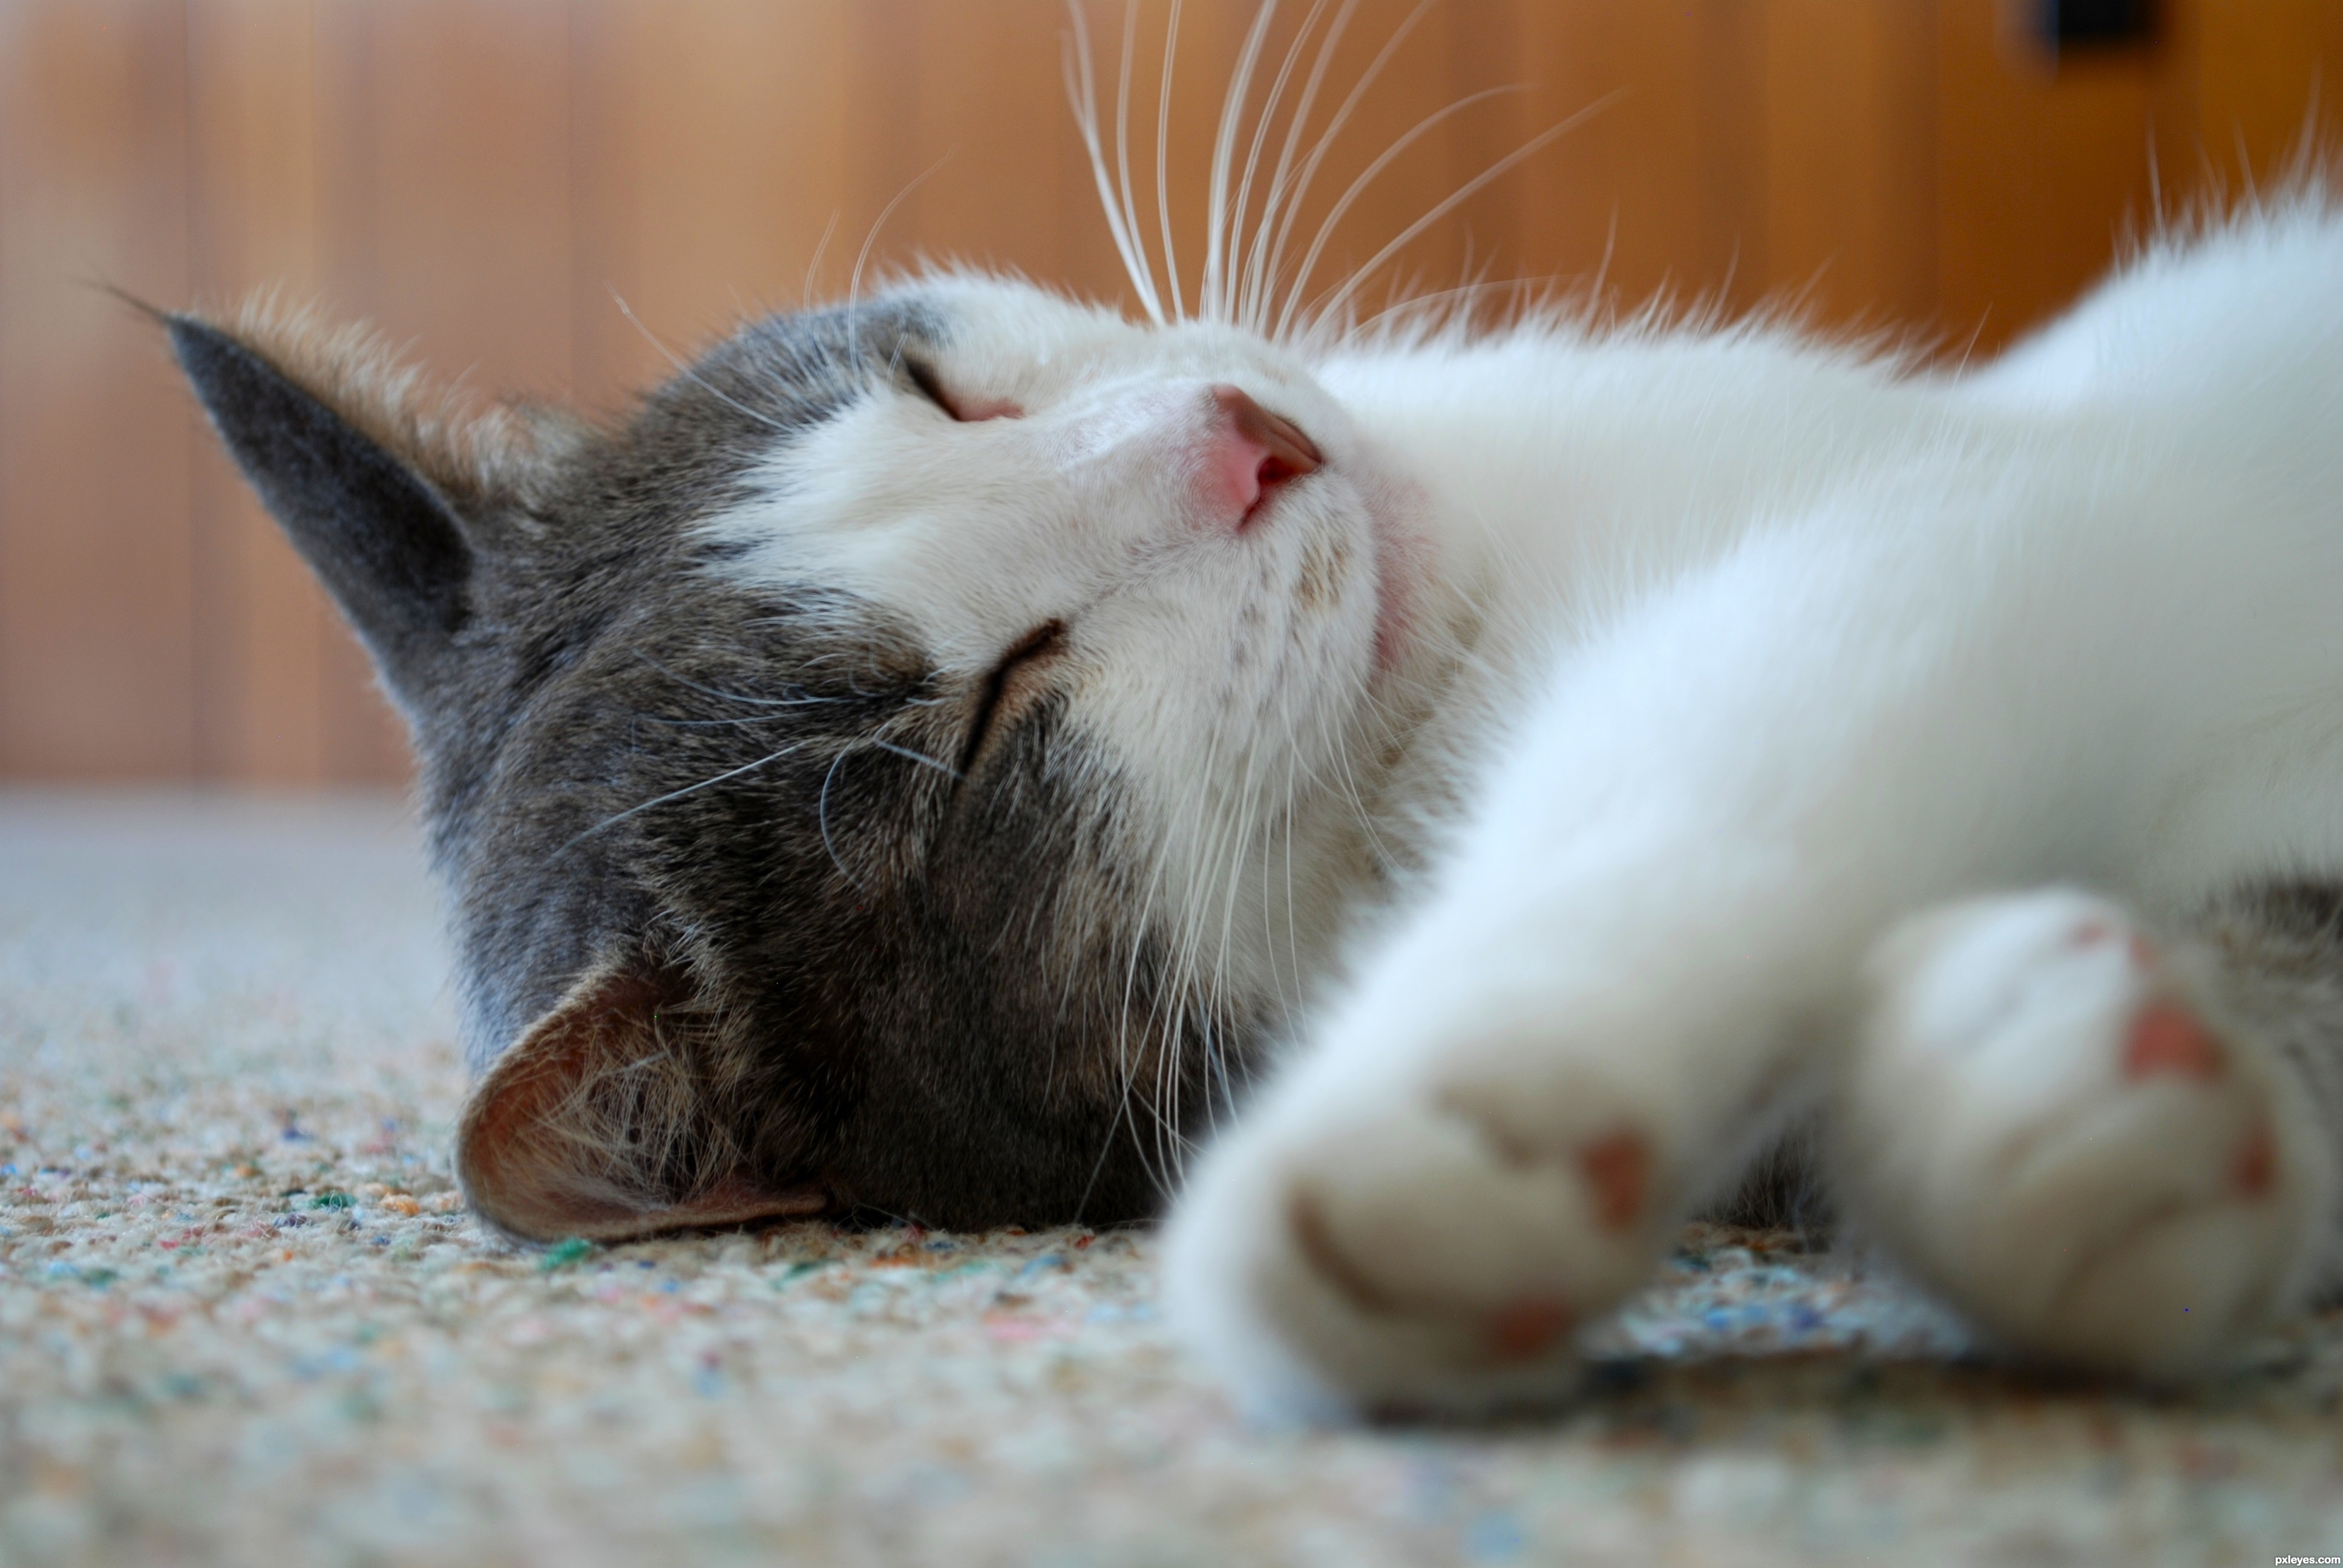 Cat Nap picture, by k5683 for: snooze 2 photography contest ...